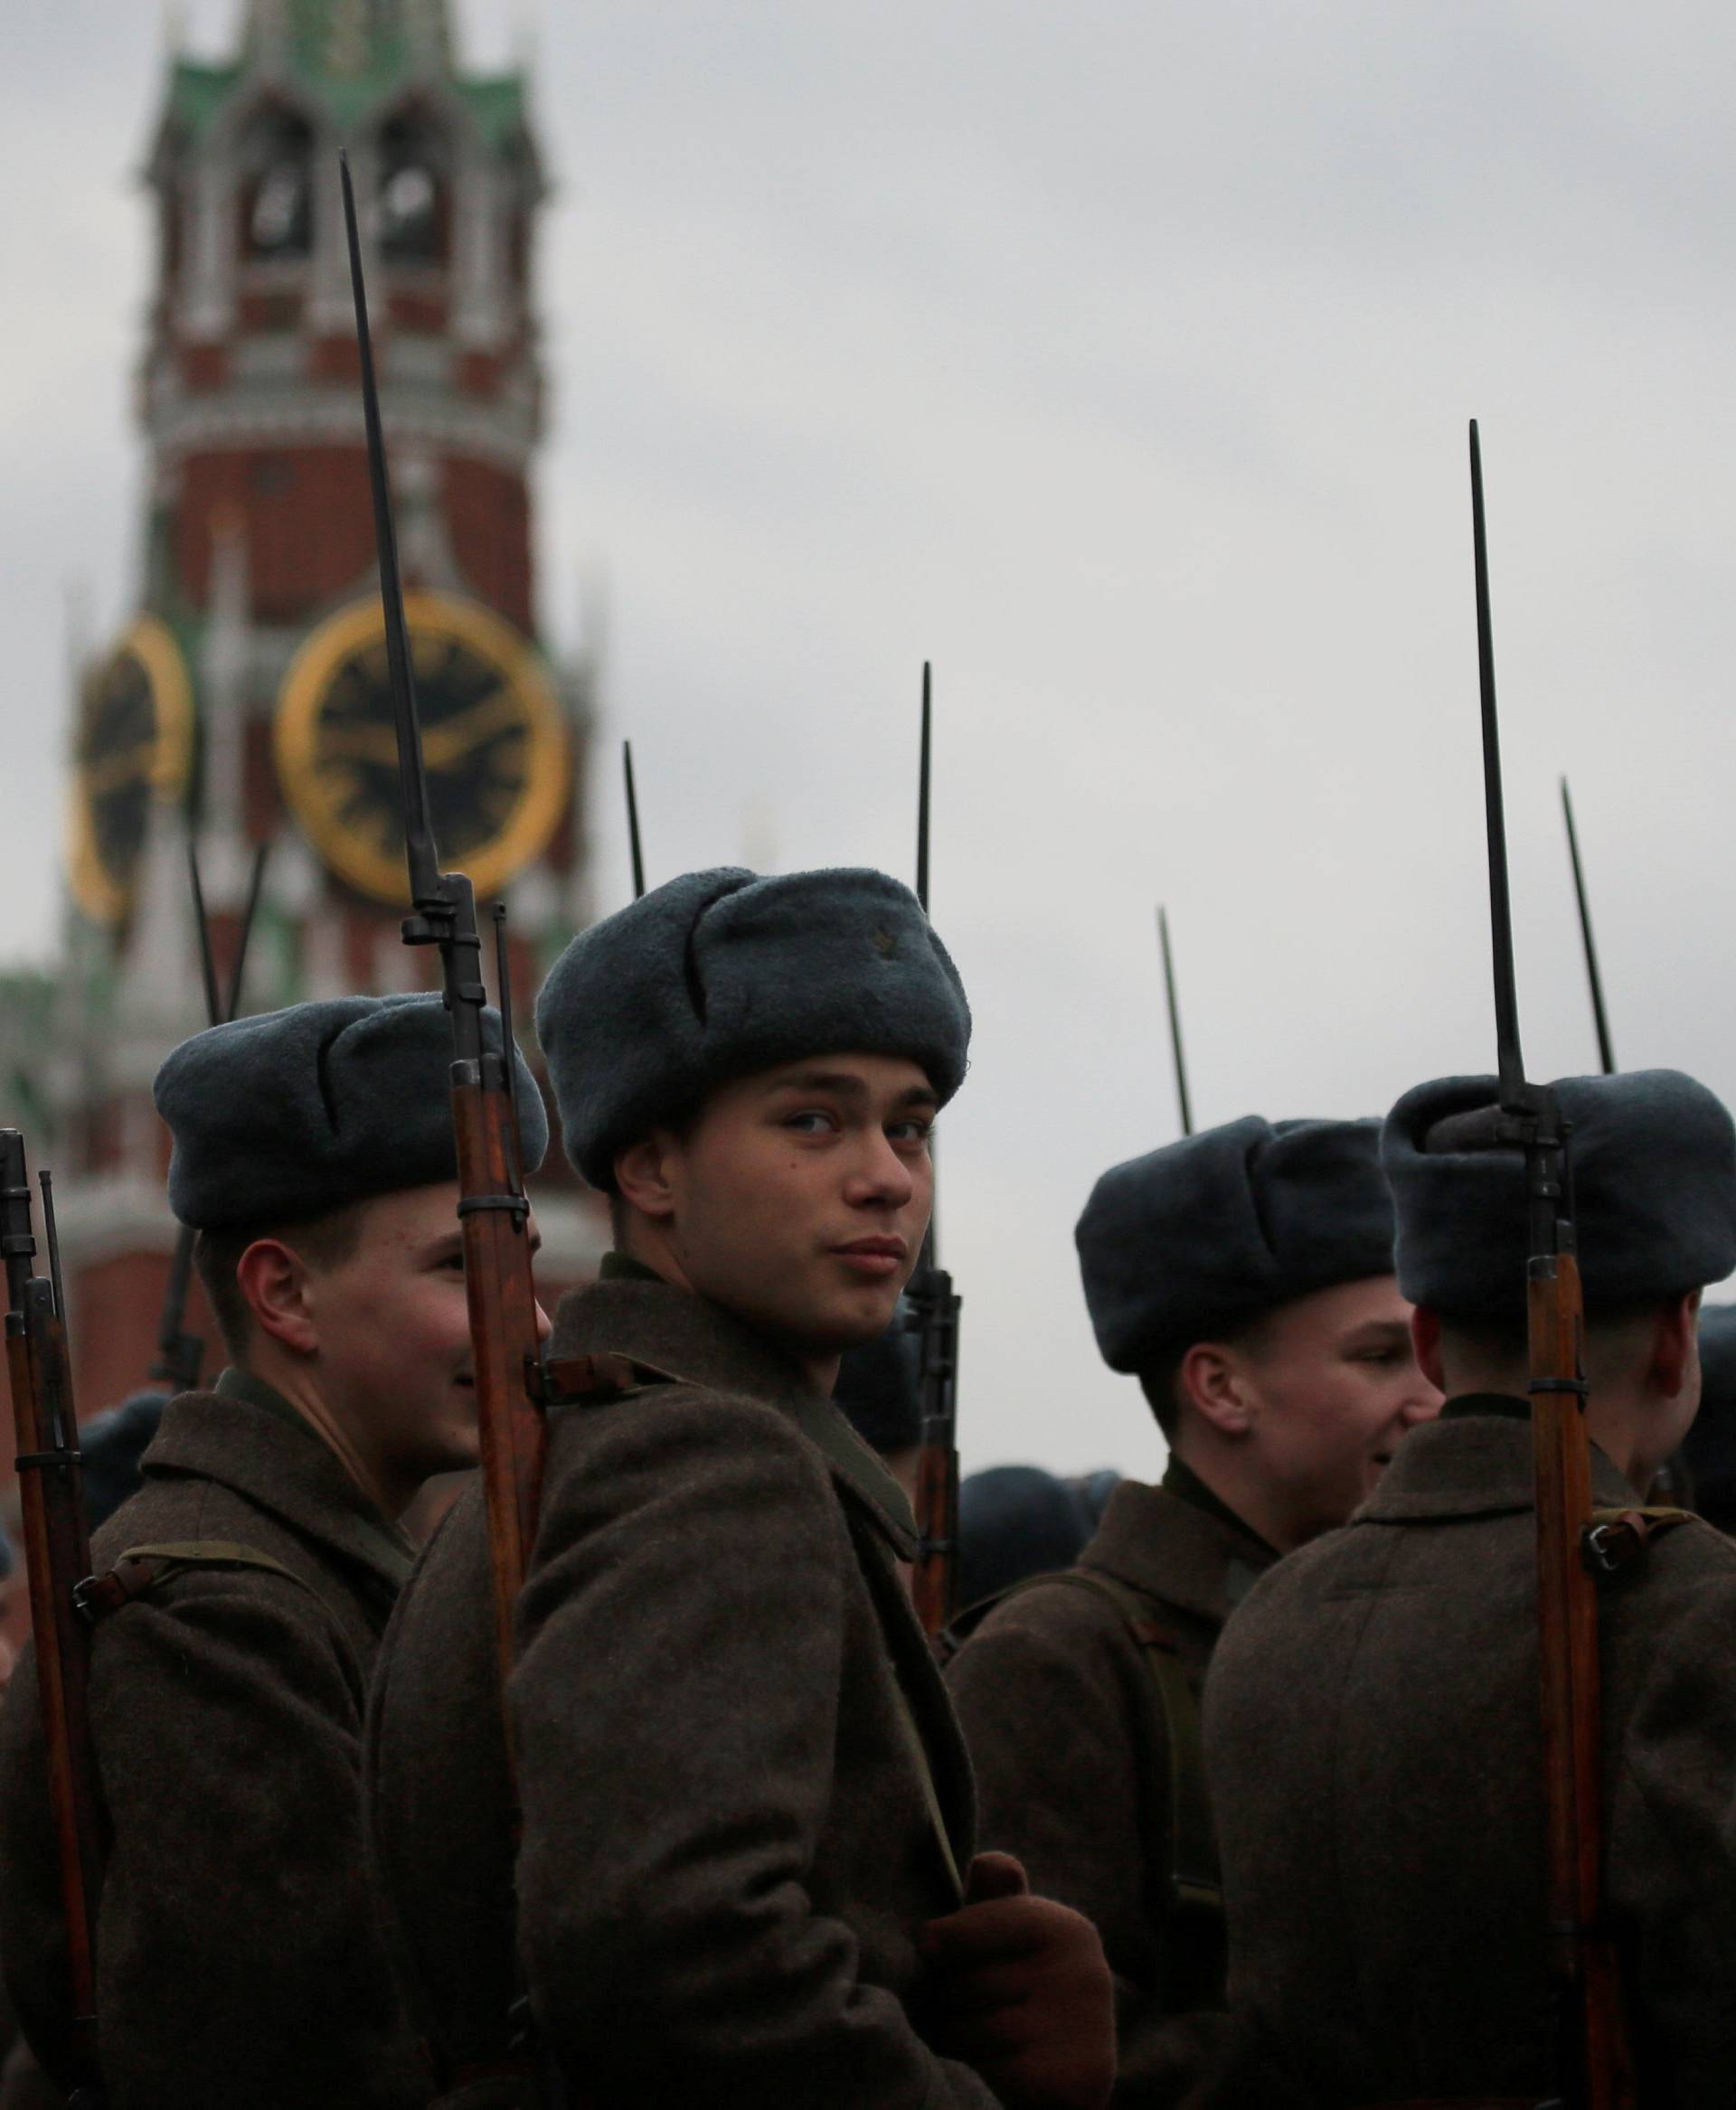 Russian servicemen dressed in historical uniforms wait before a military parade marking the anniversary of the 1941 parade, when Soviet soldiers marched towards the front lines of World War Two, at Red Square in Moscow